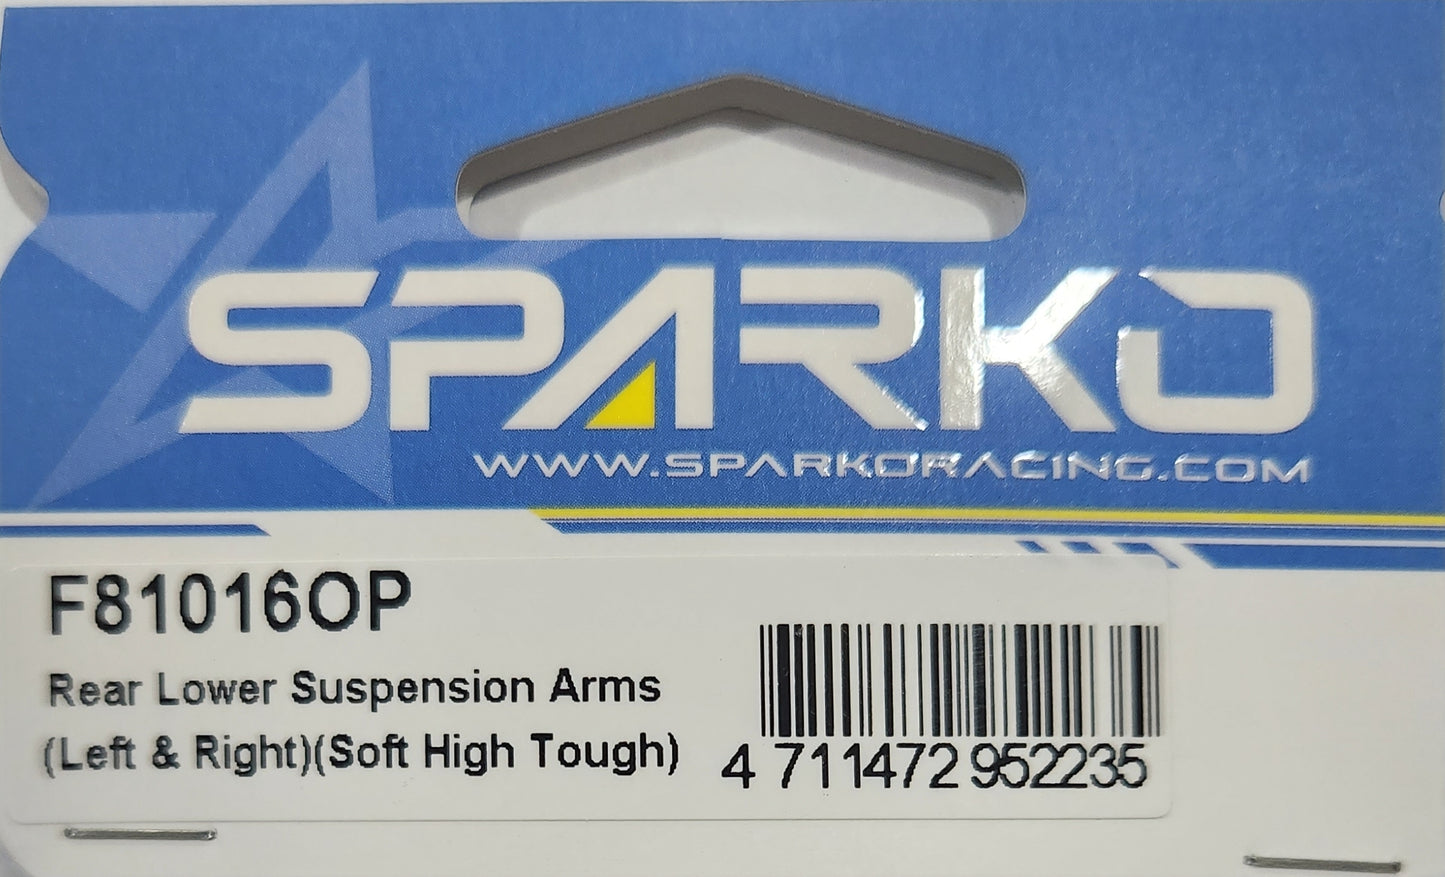 Sparko Racing Rear Lower Suspension Arms (Left & Right) (Soft High Tough)